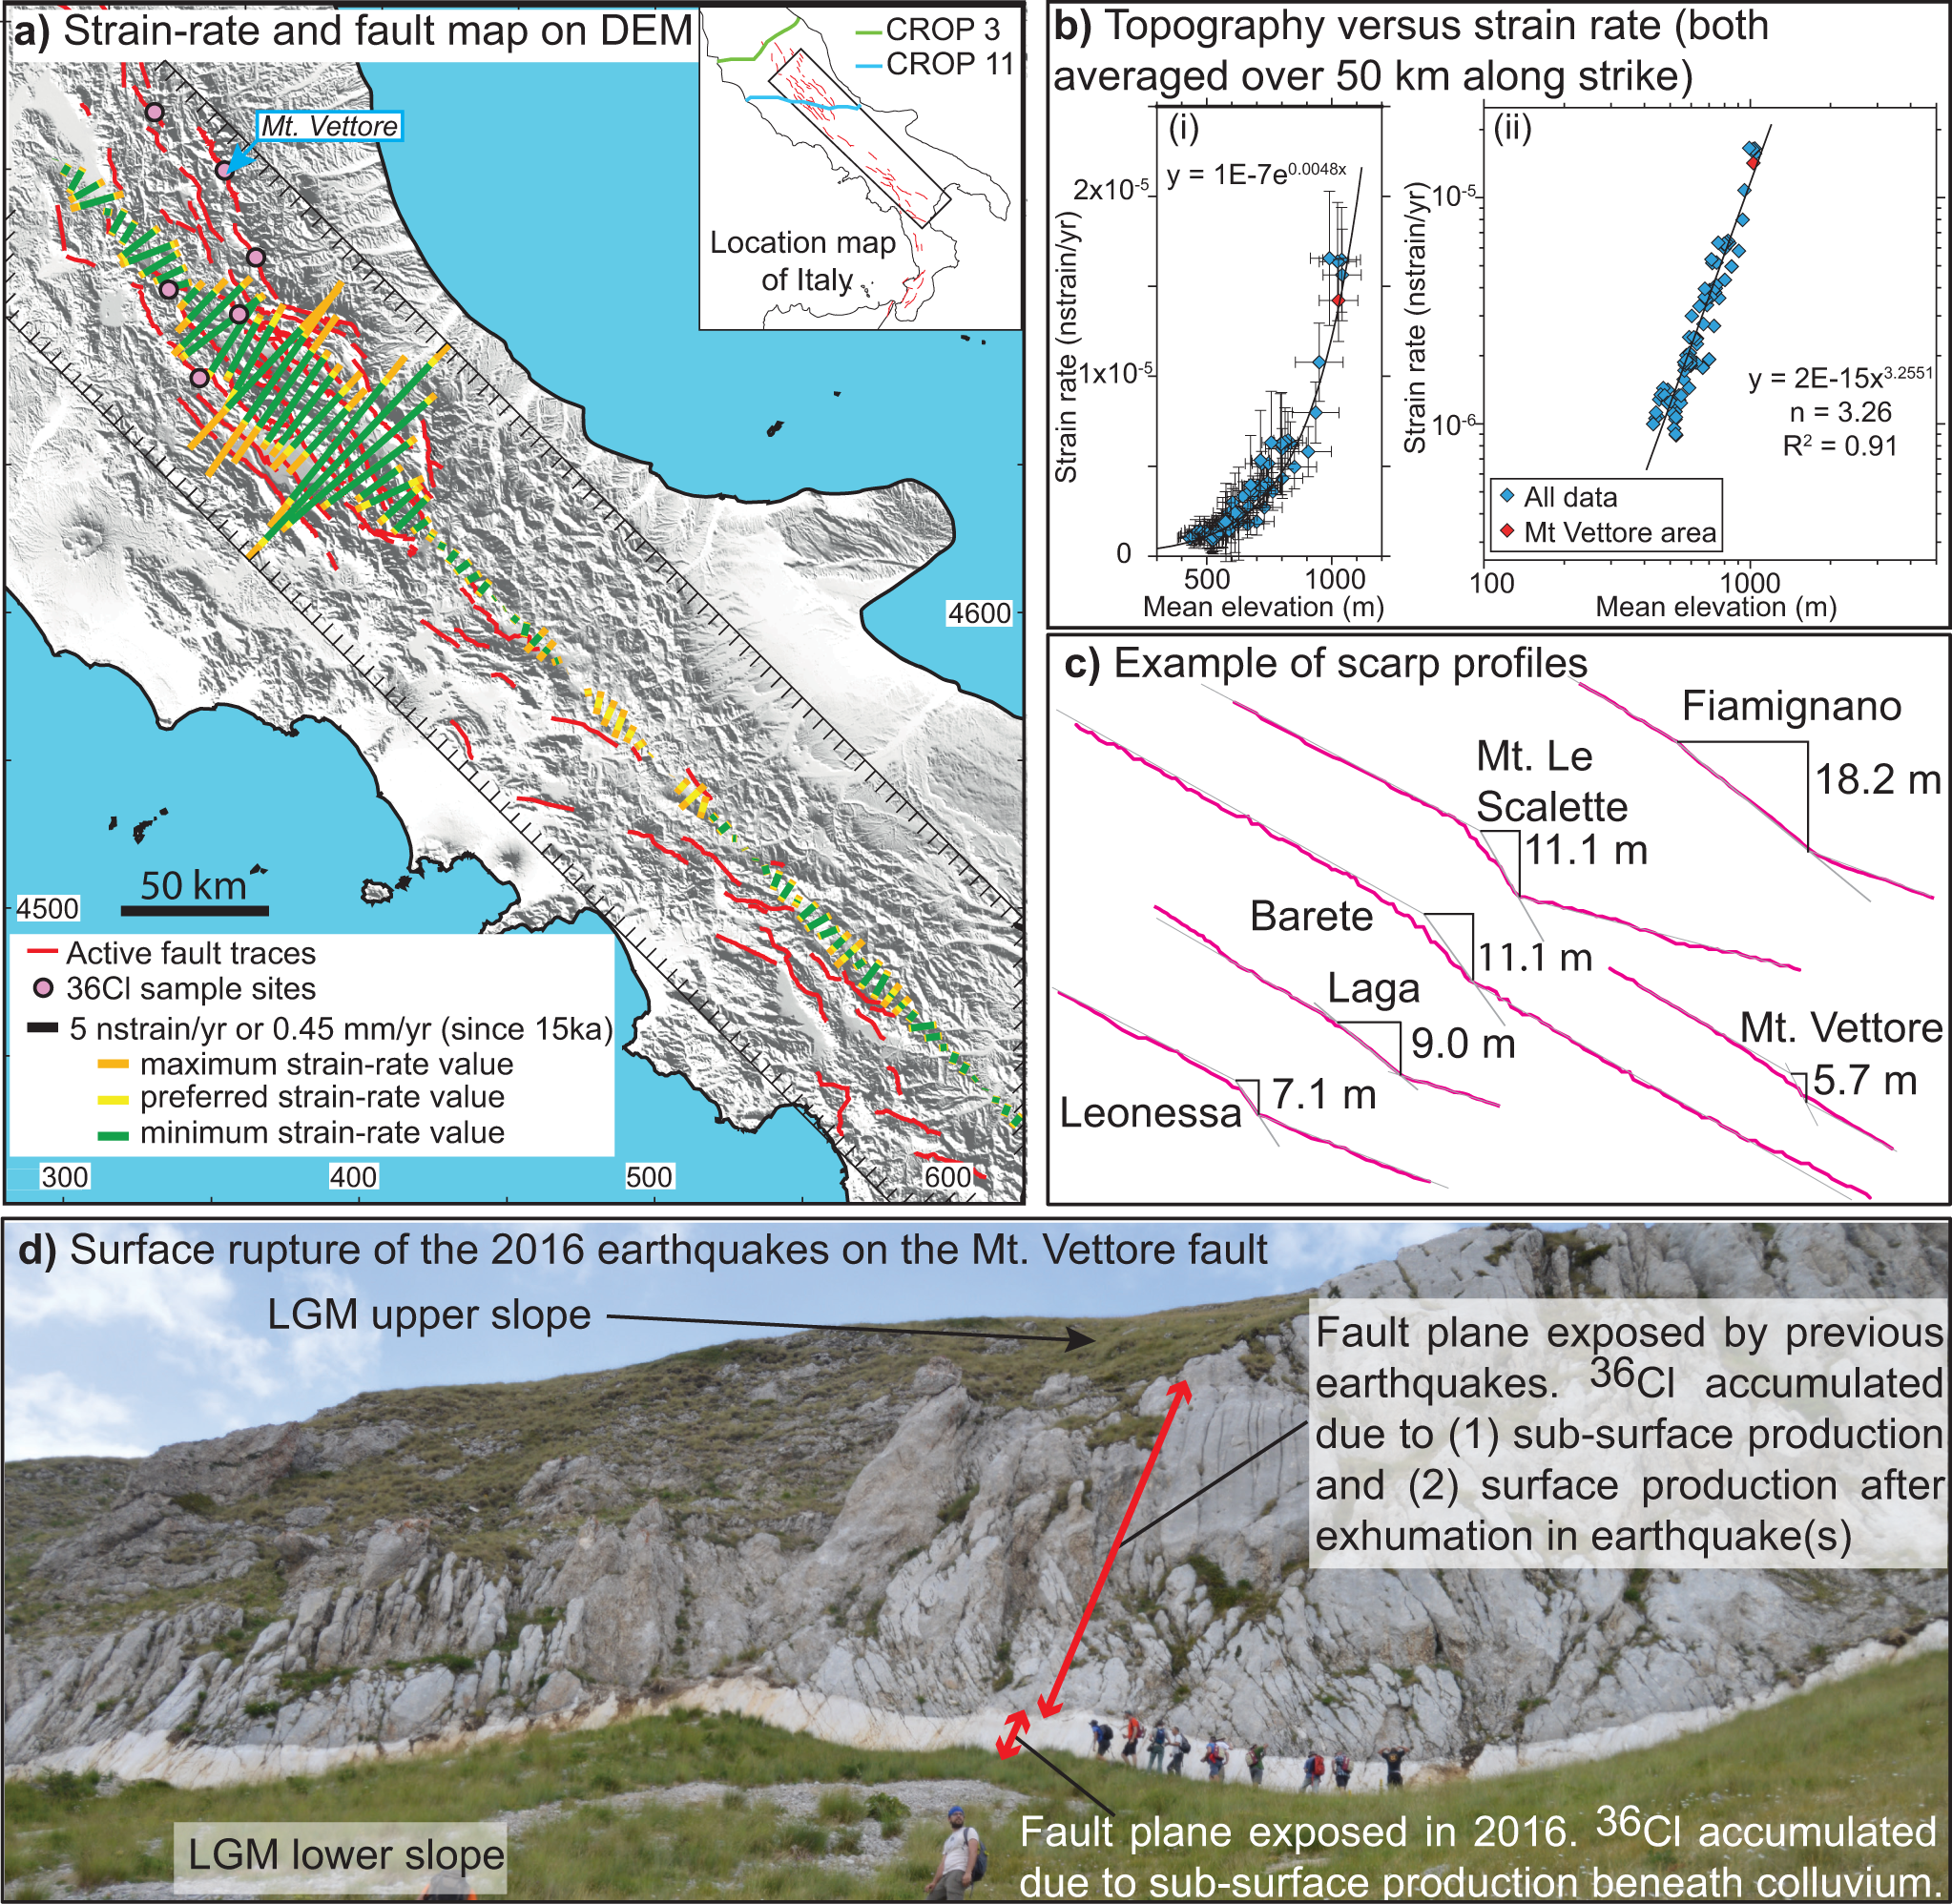 Surface faulting earthquake clustering controlled by fault and shear-zone  interactions | Nature Communications